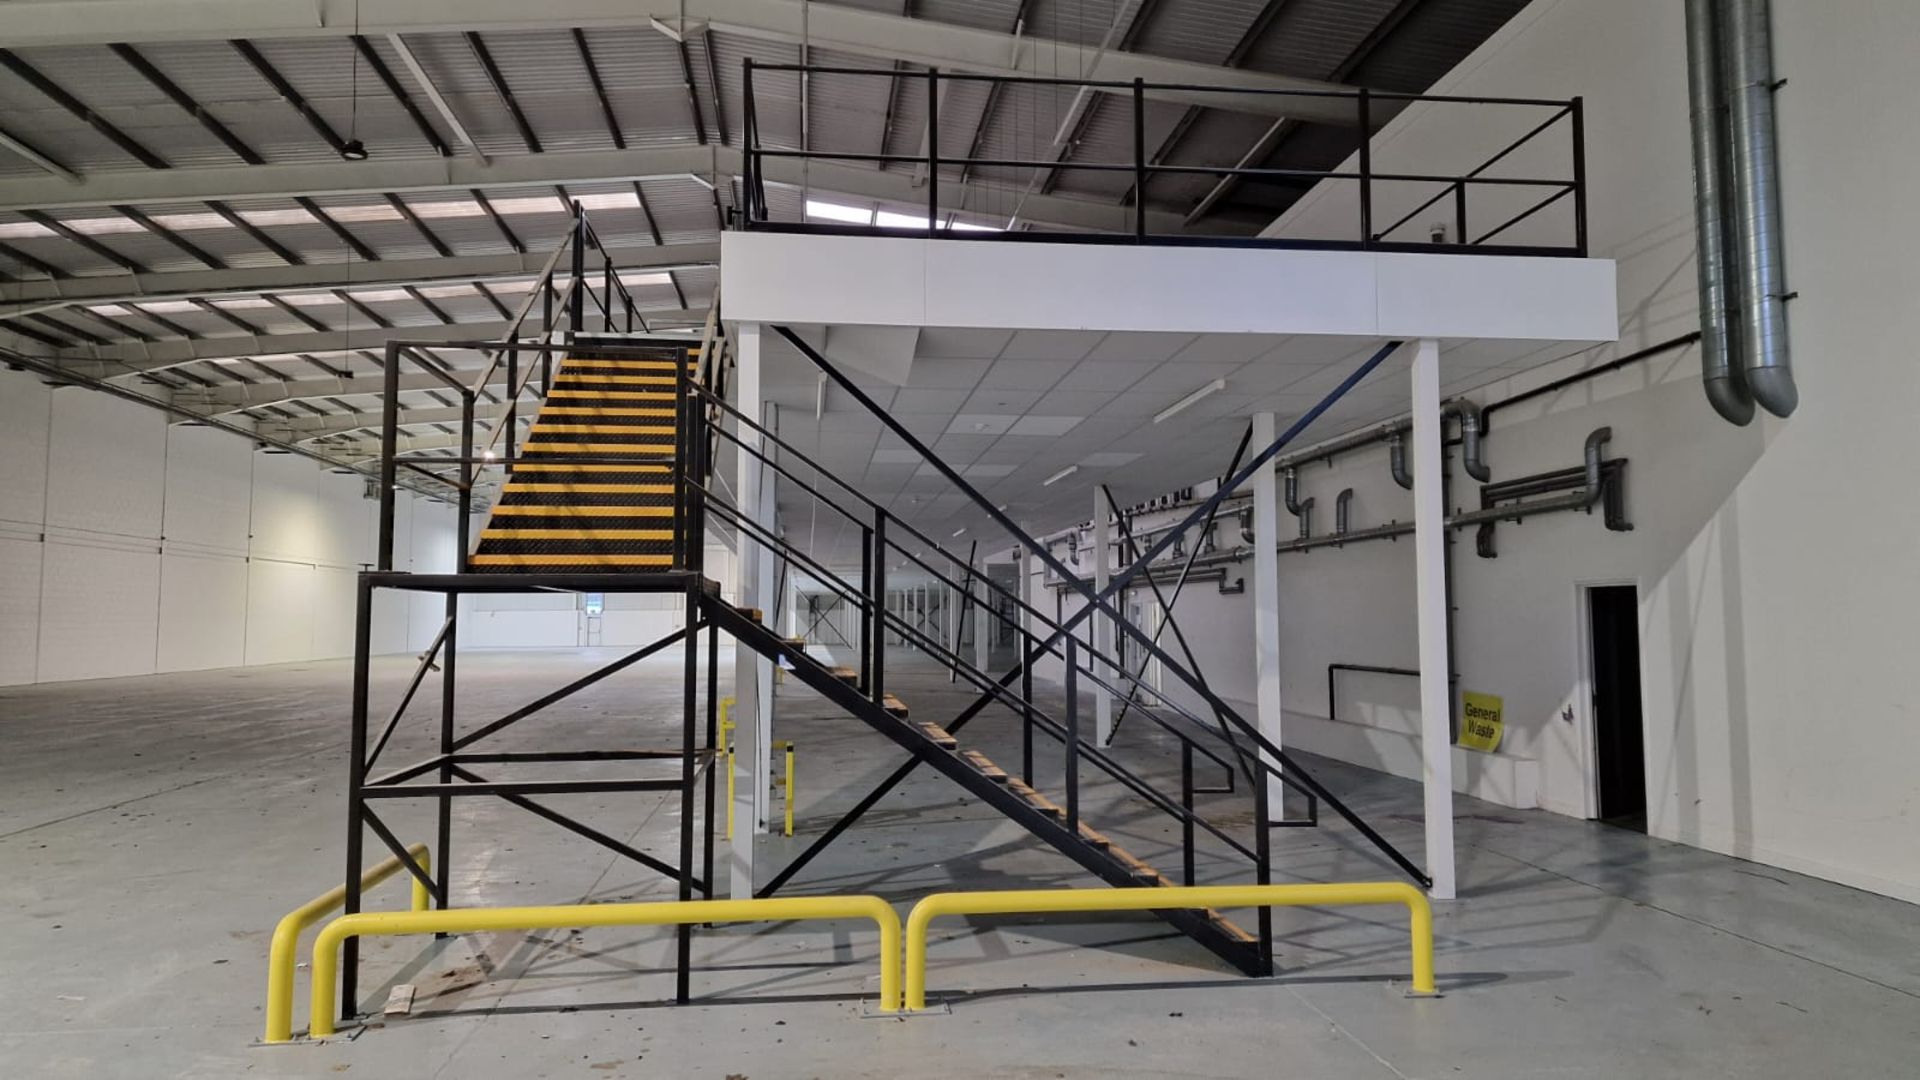 Mezzanine Floor - 1150m2 - with 2 x Staircases & Handrail - Image 3 of 5